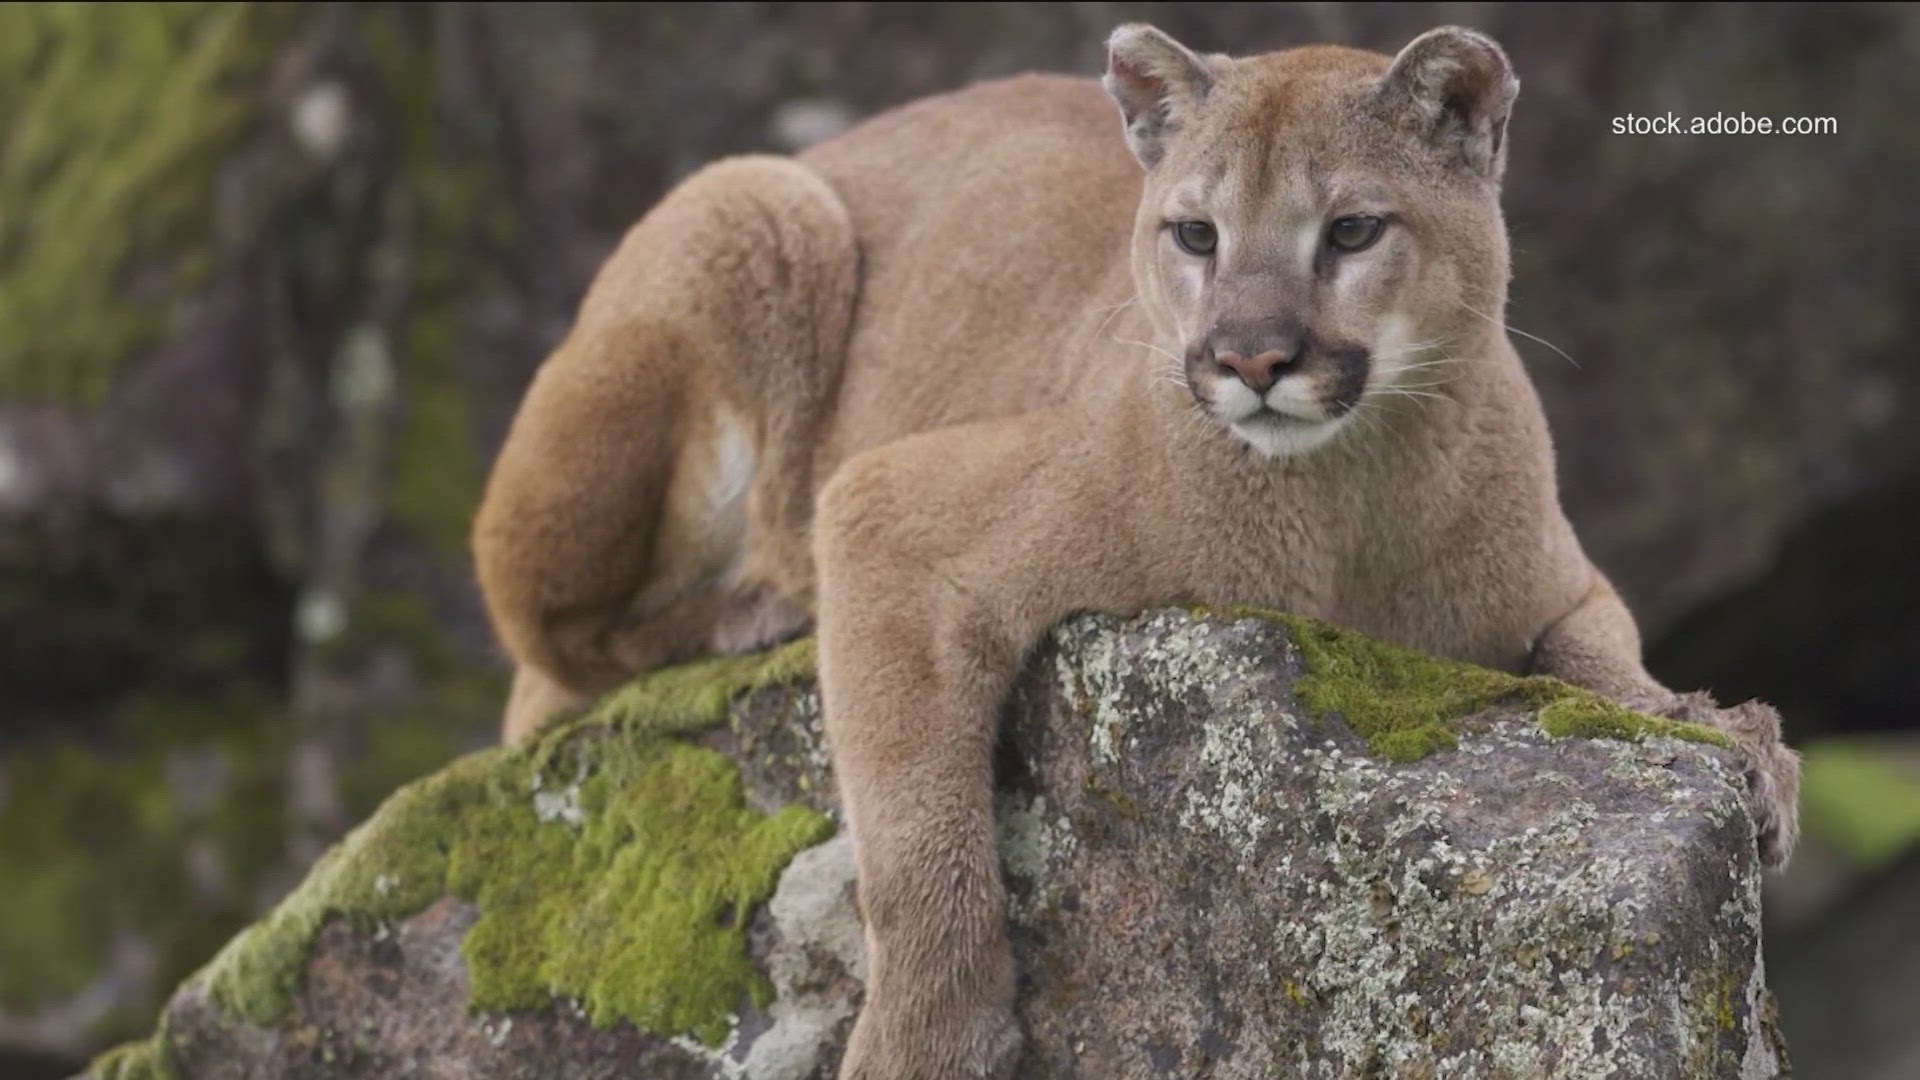 Texas is currently the only state that doesn't prohibit hunting and trapping of mountain lions.